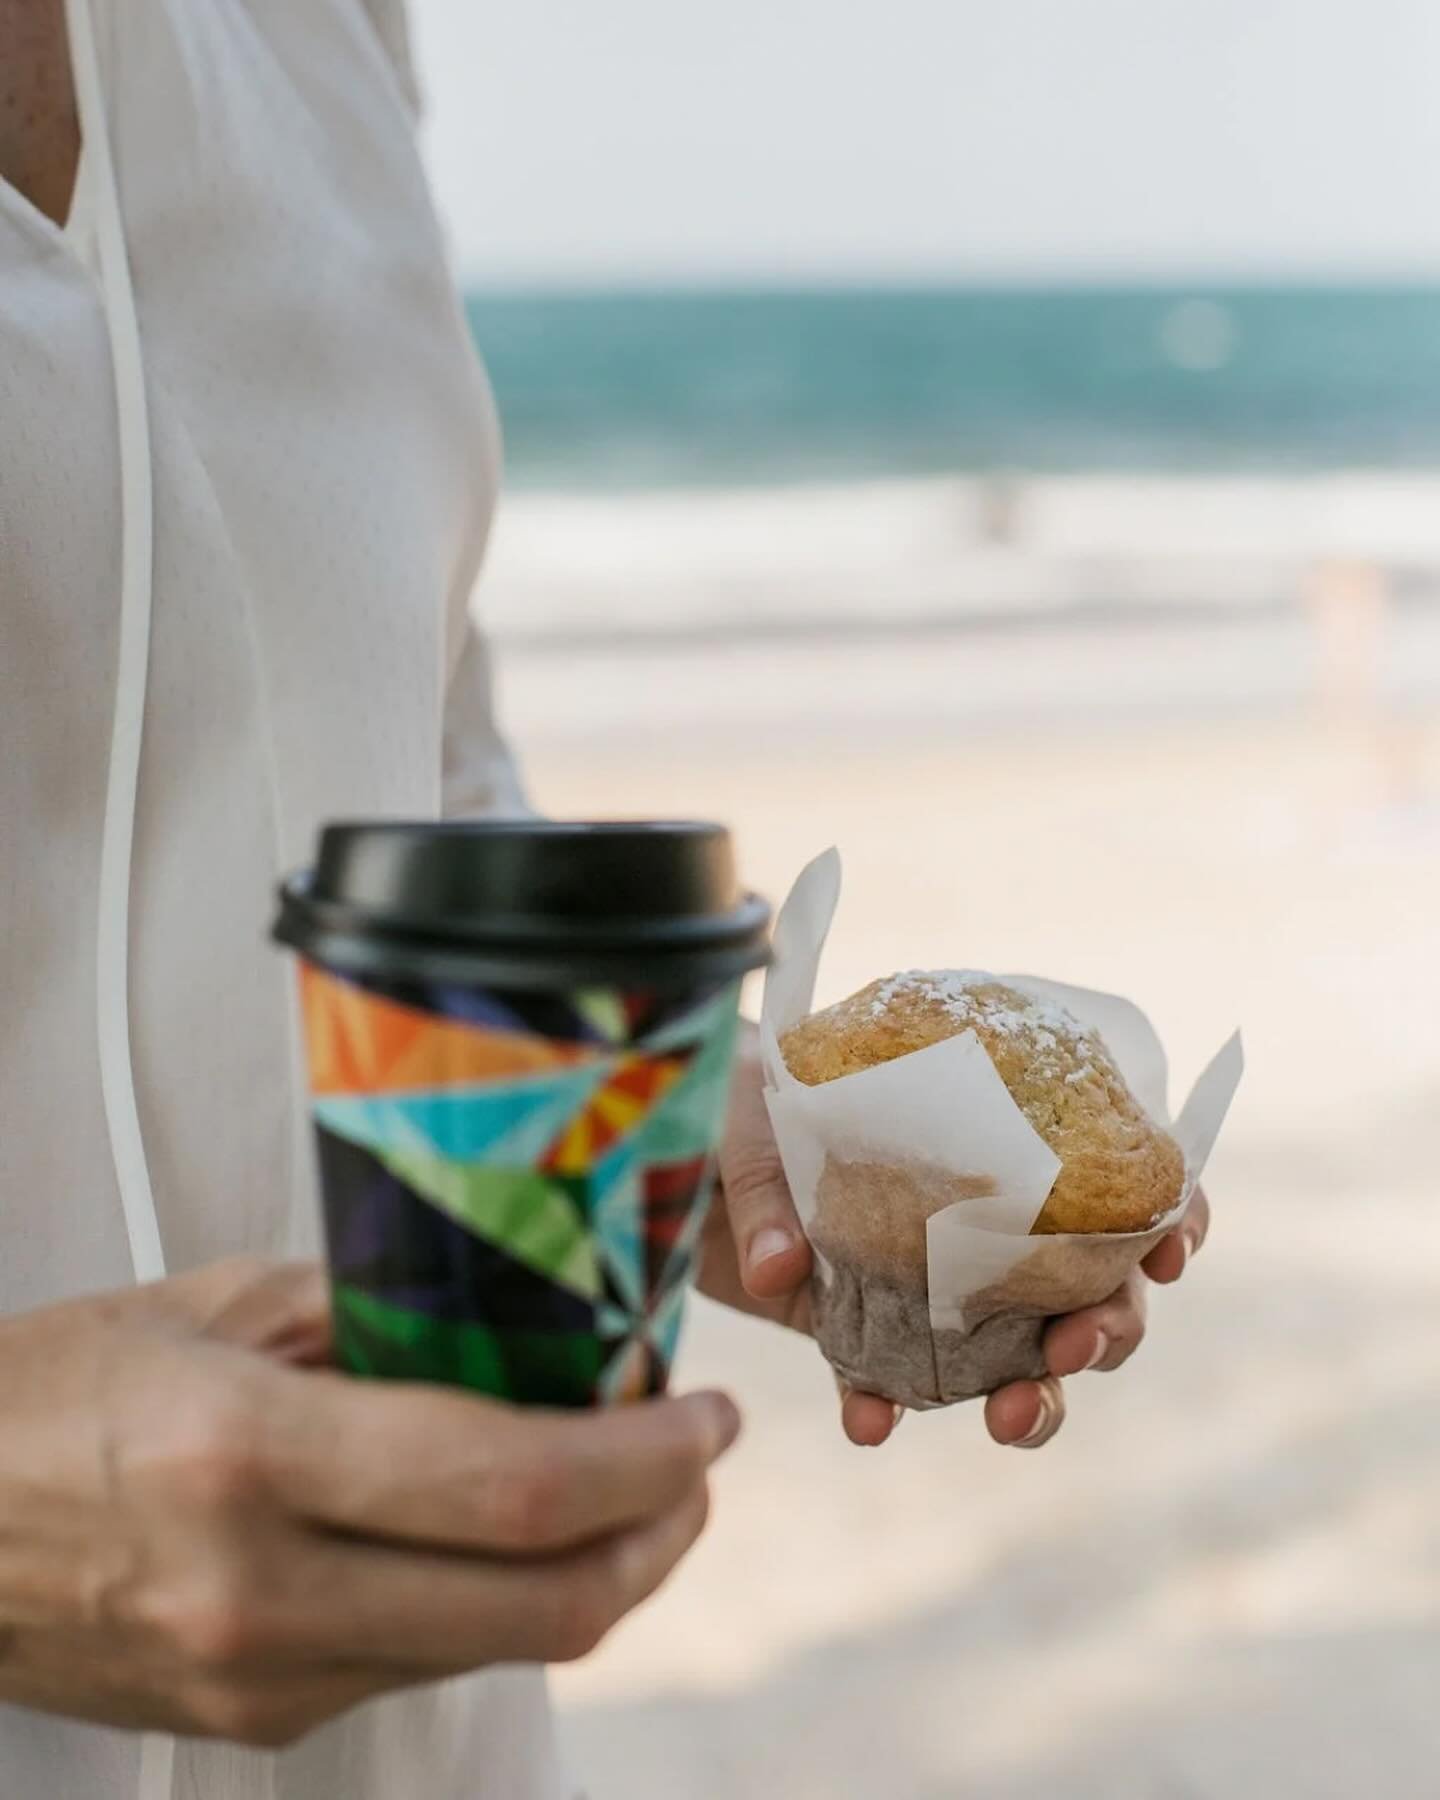 Looking for a quick bite during your busy week? Look no further than Boardwalk Bistro Kiosk! 

Indulge in our freshly baked muffins, granola, baguettes, salads, fruit salads, coffee, smoothies and more. Open every day from 6:30am, it&rsquo;s your gat